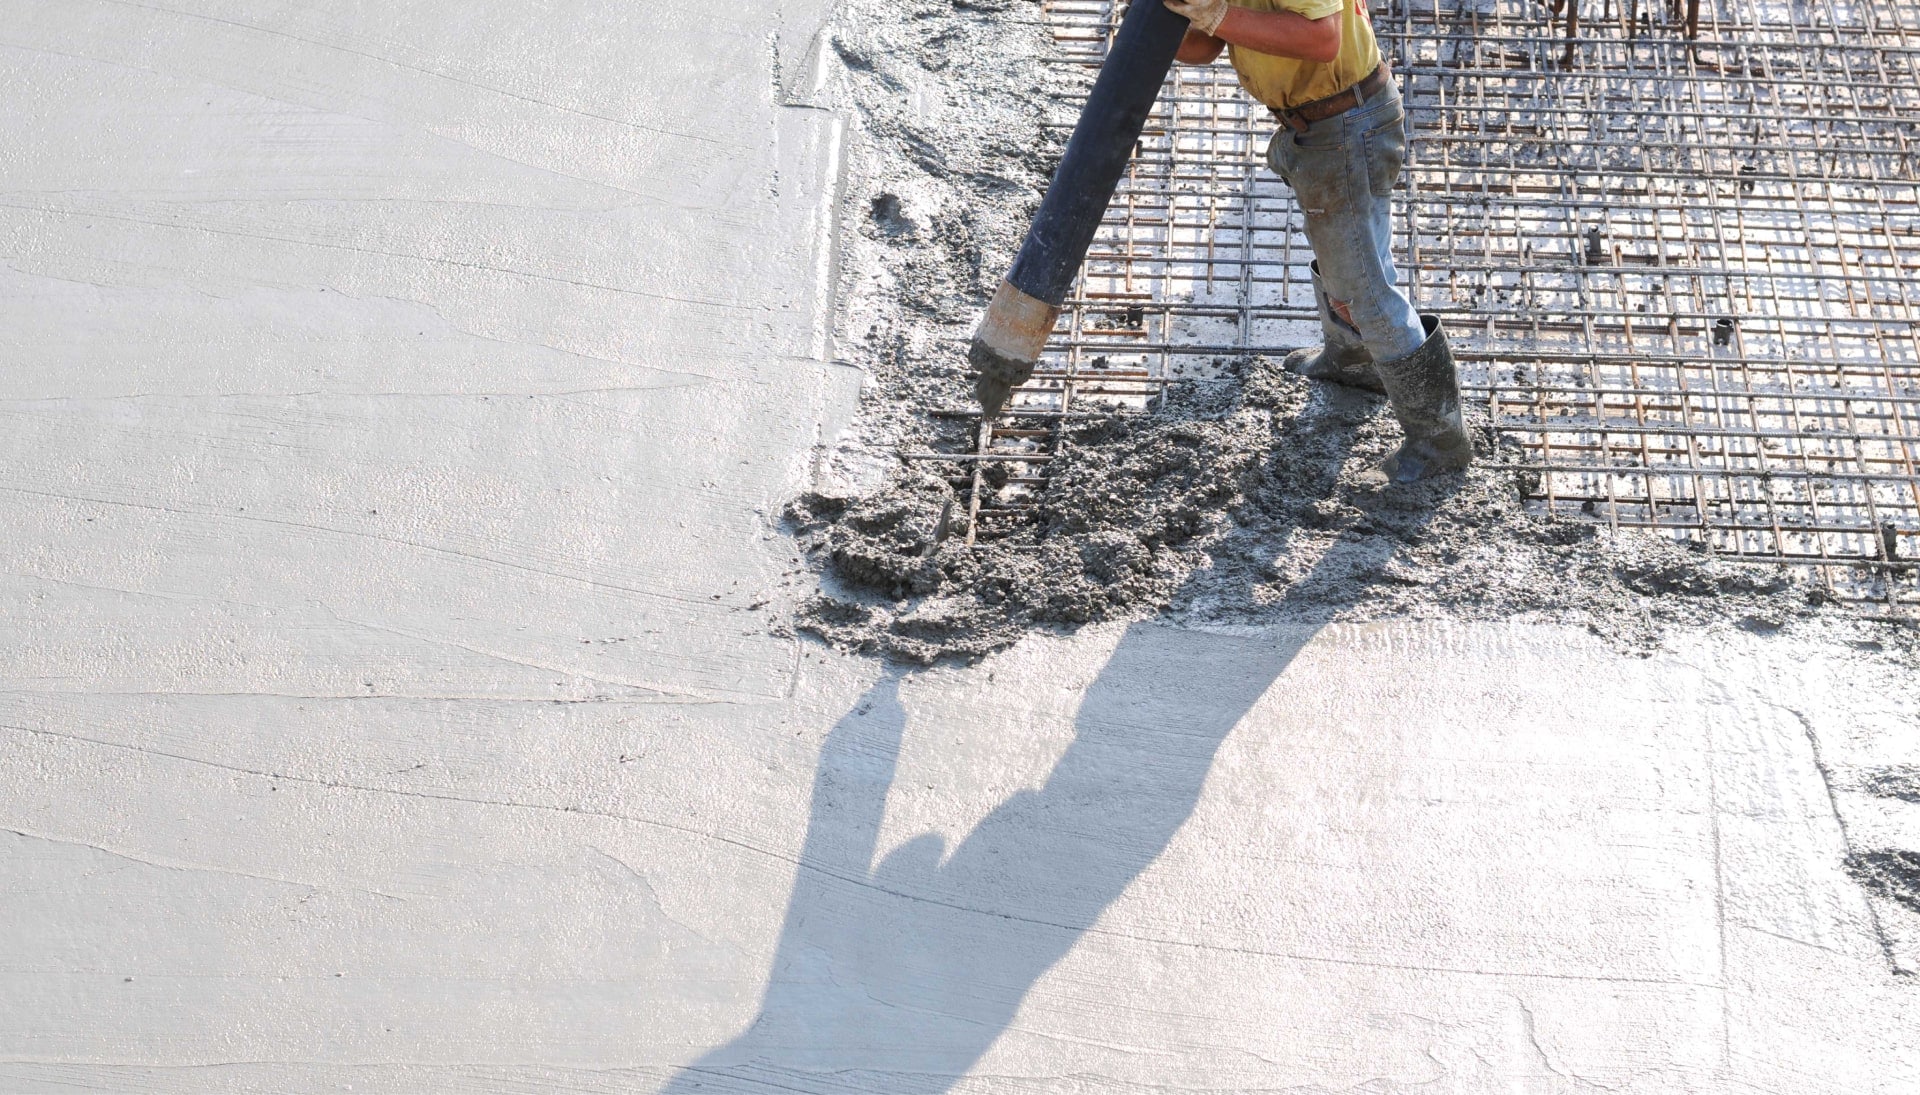 High-Quality Concrete Foundation Services Idaho Falls Trust Experienced Contractors for Strong Concrete Foundations for Residential or Commercial Projects.